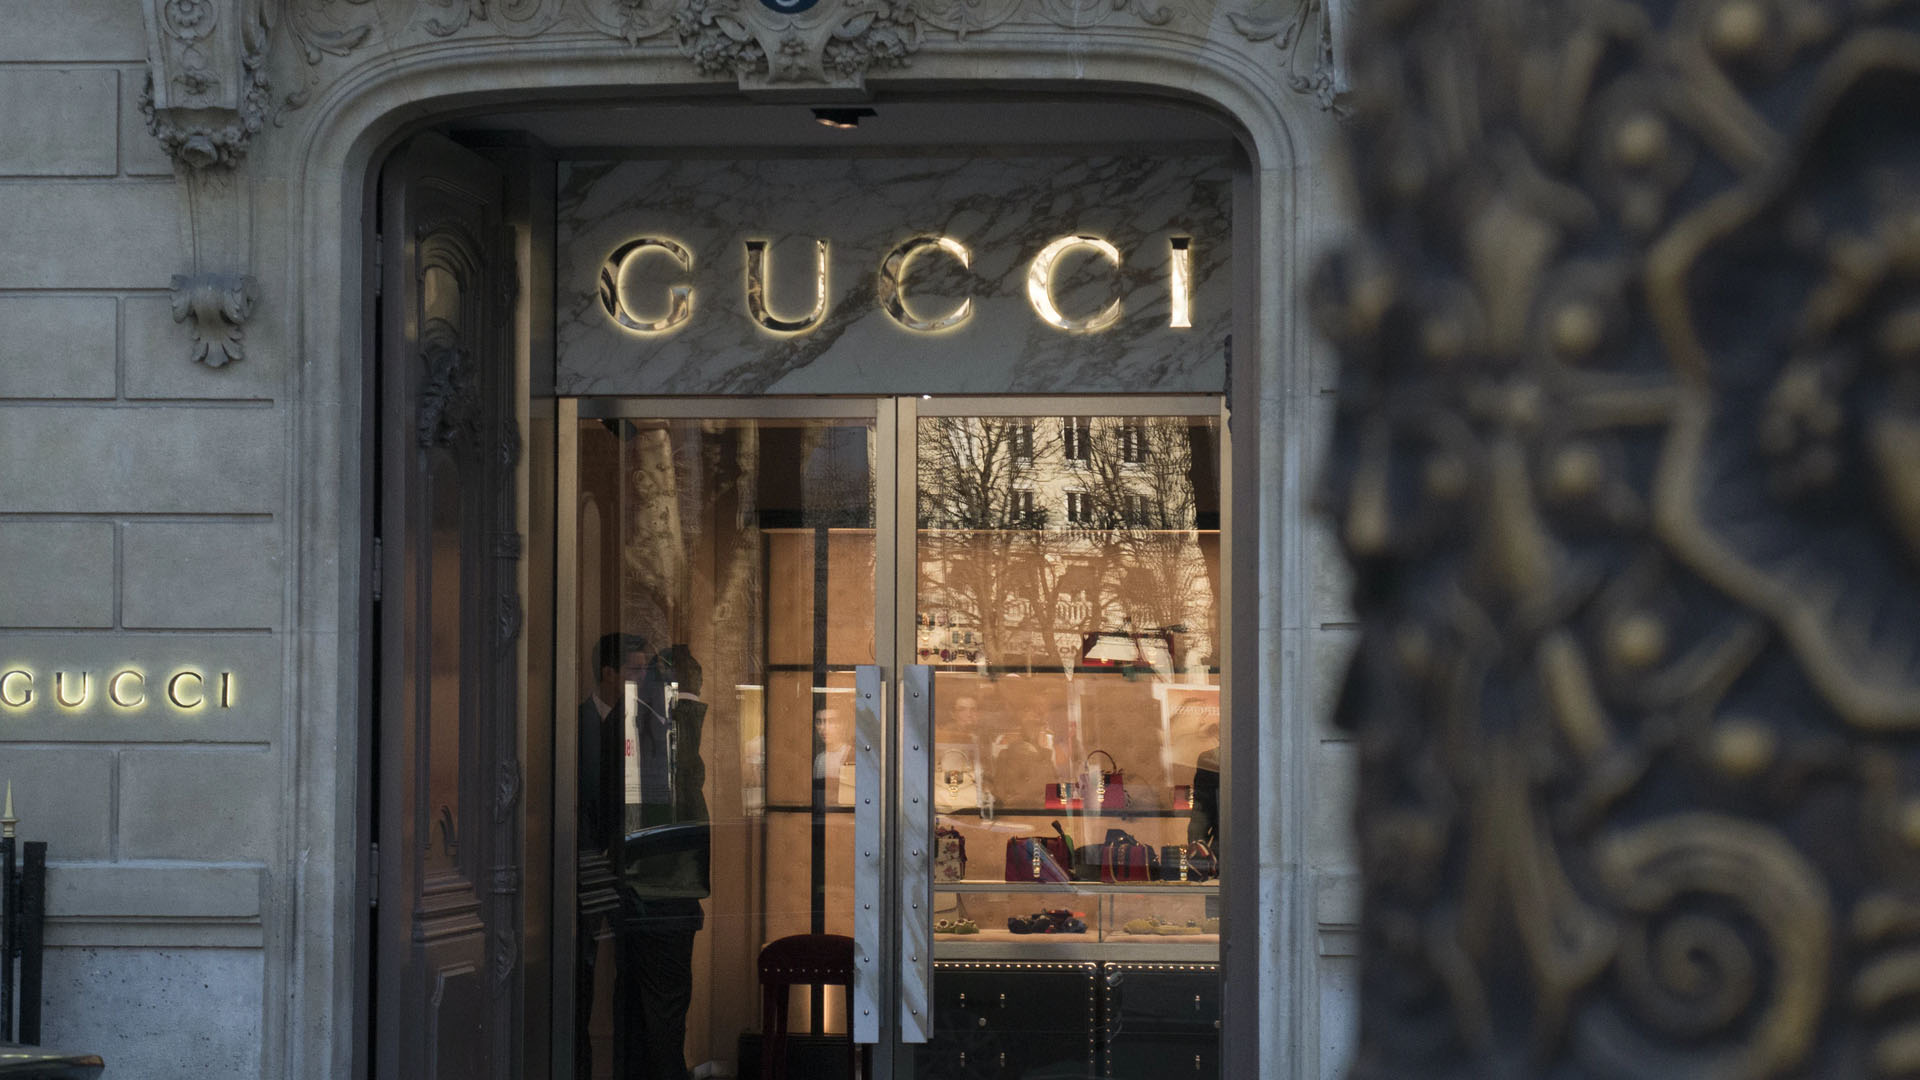 Gucci Promo codes for 2021 - The West News